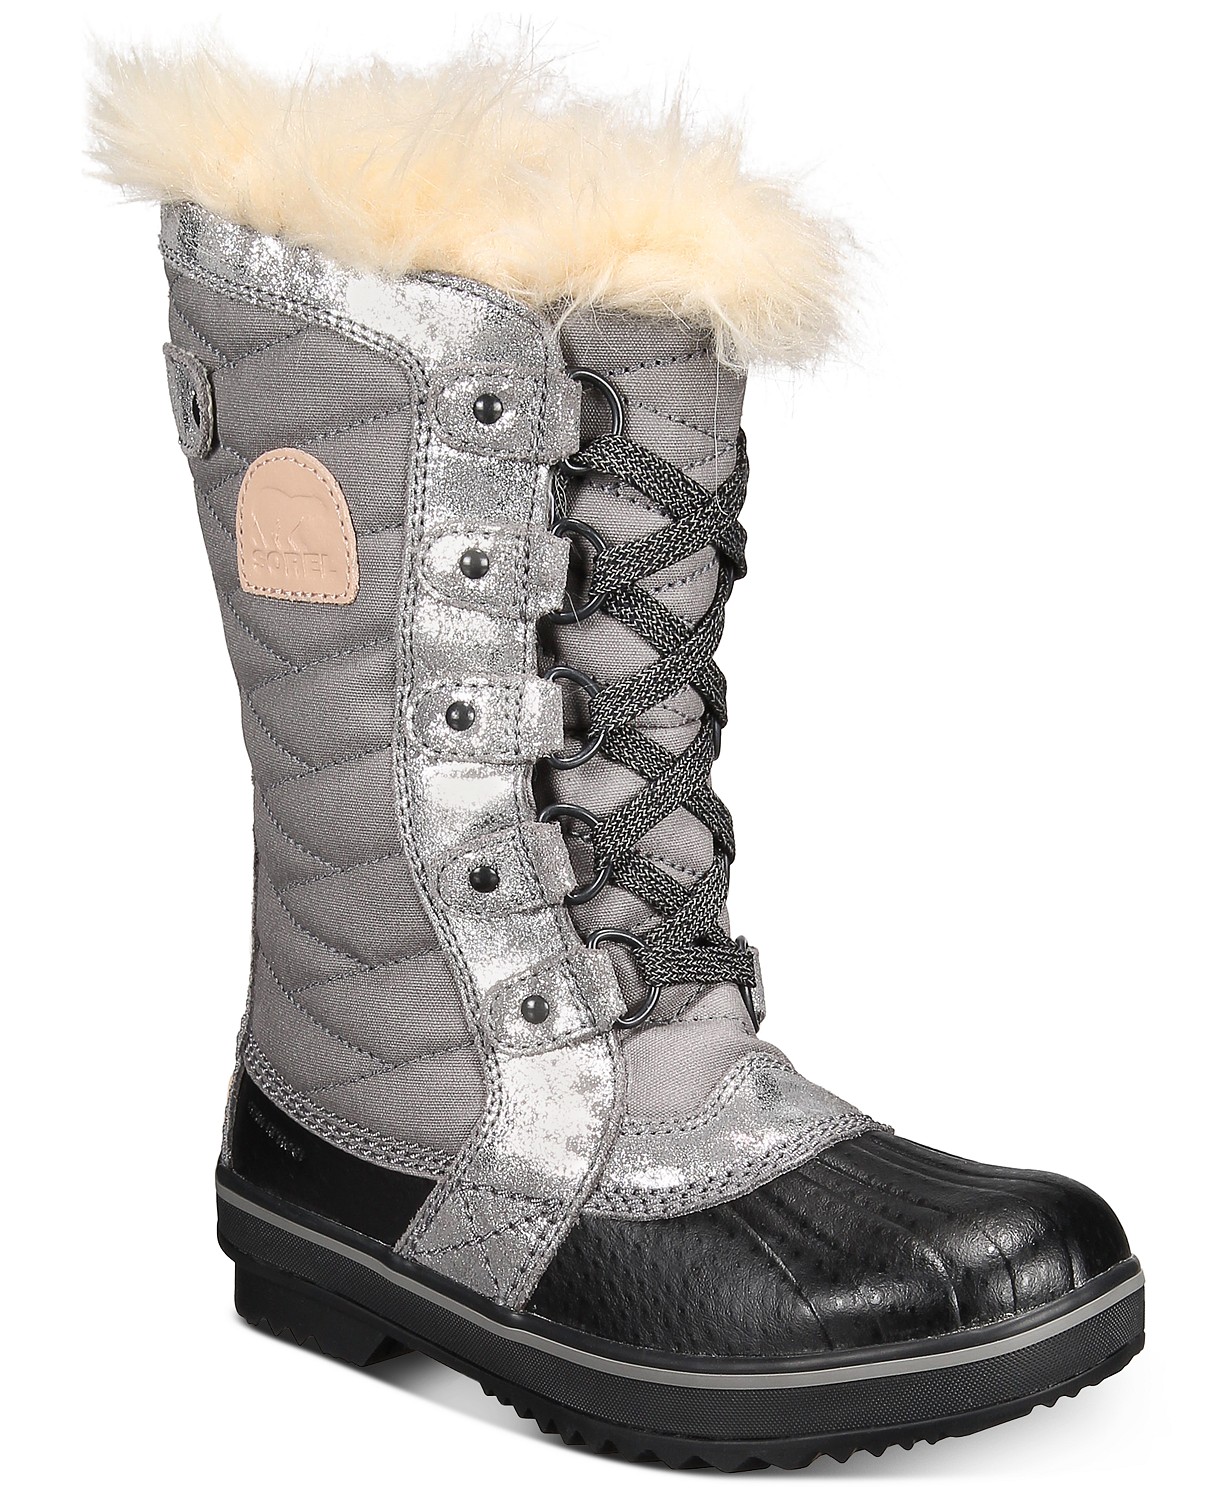 www.couturepoint.com-sorel-womens-brown-suede-whitney-flurry-snow-boots-copy